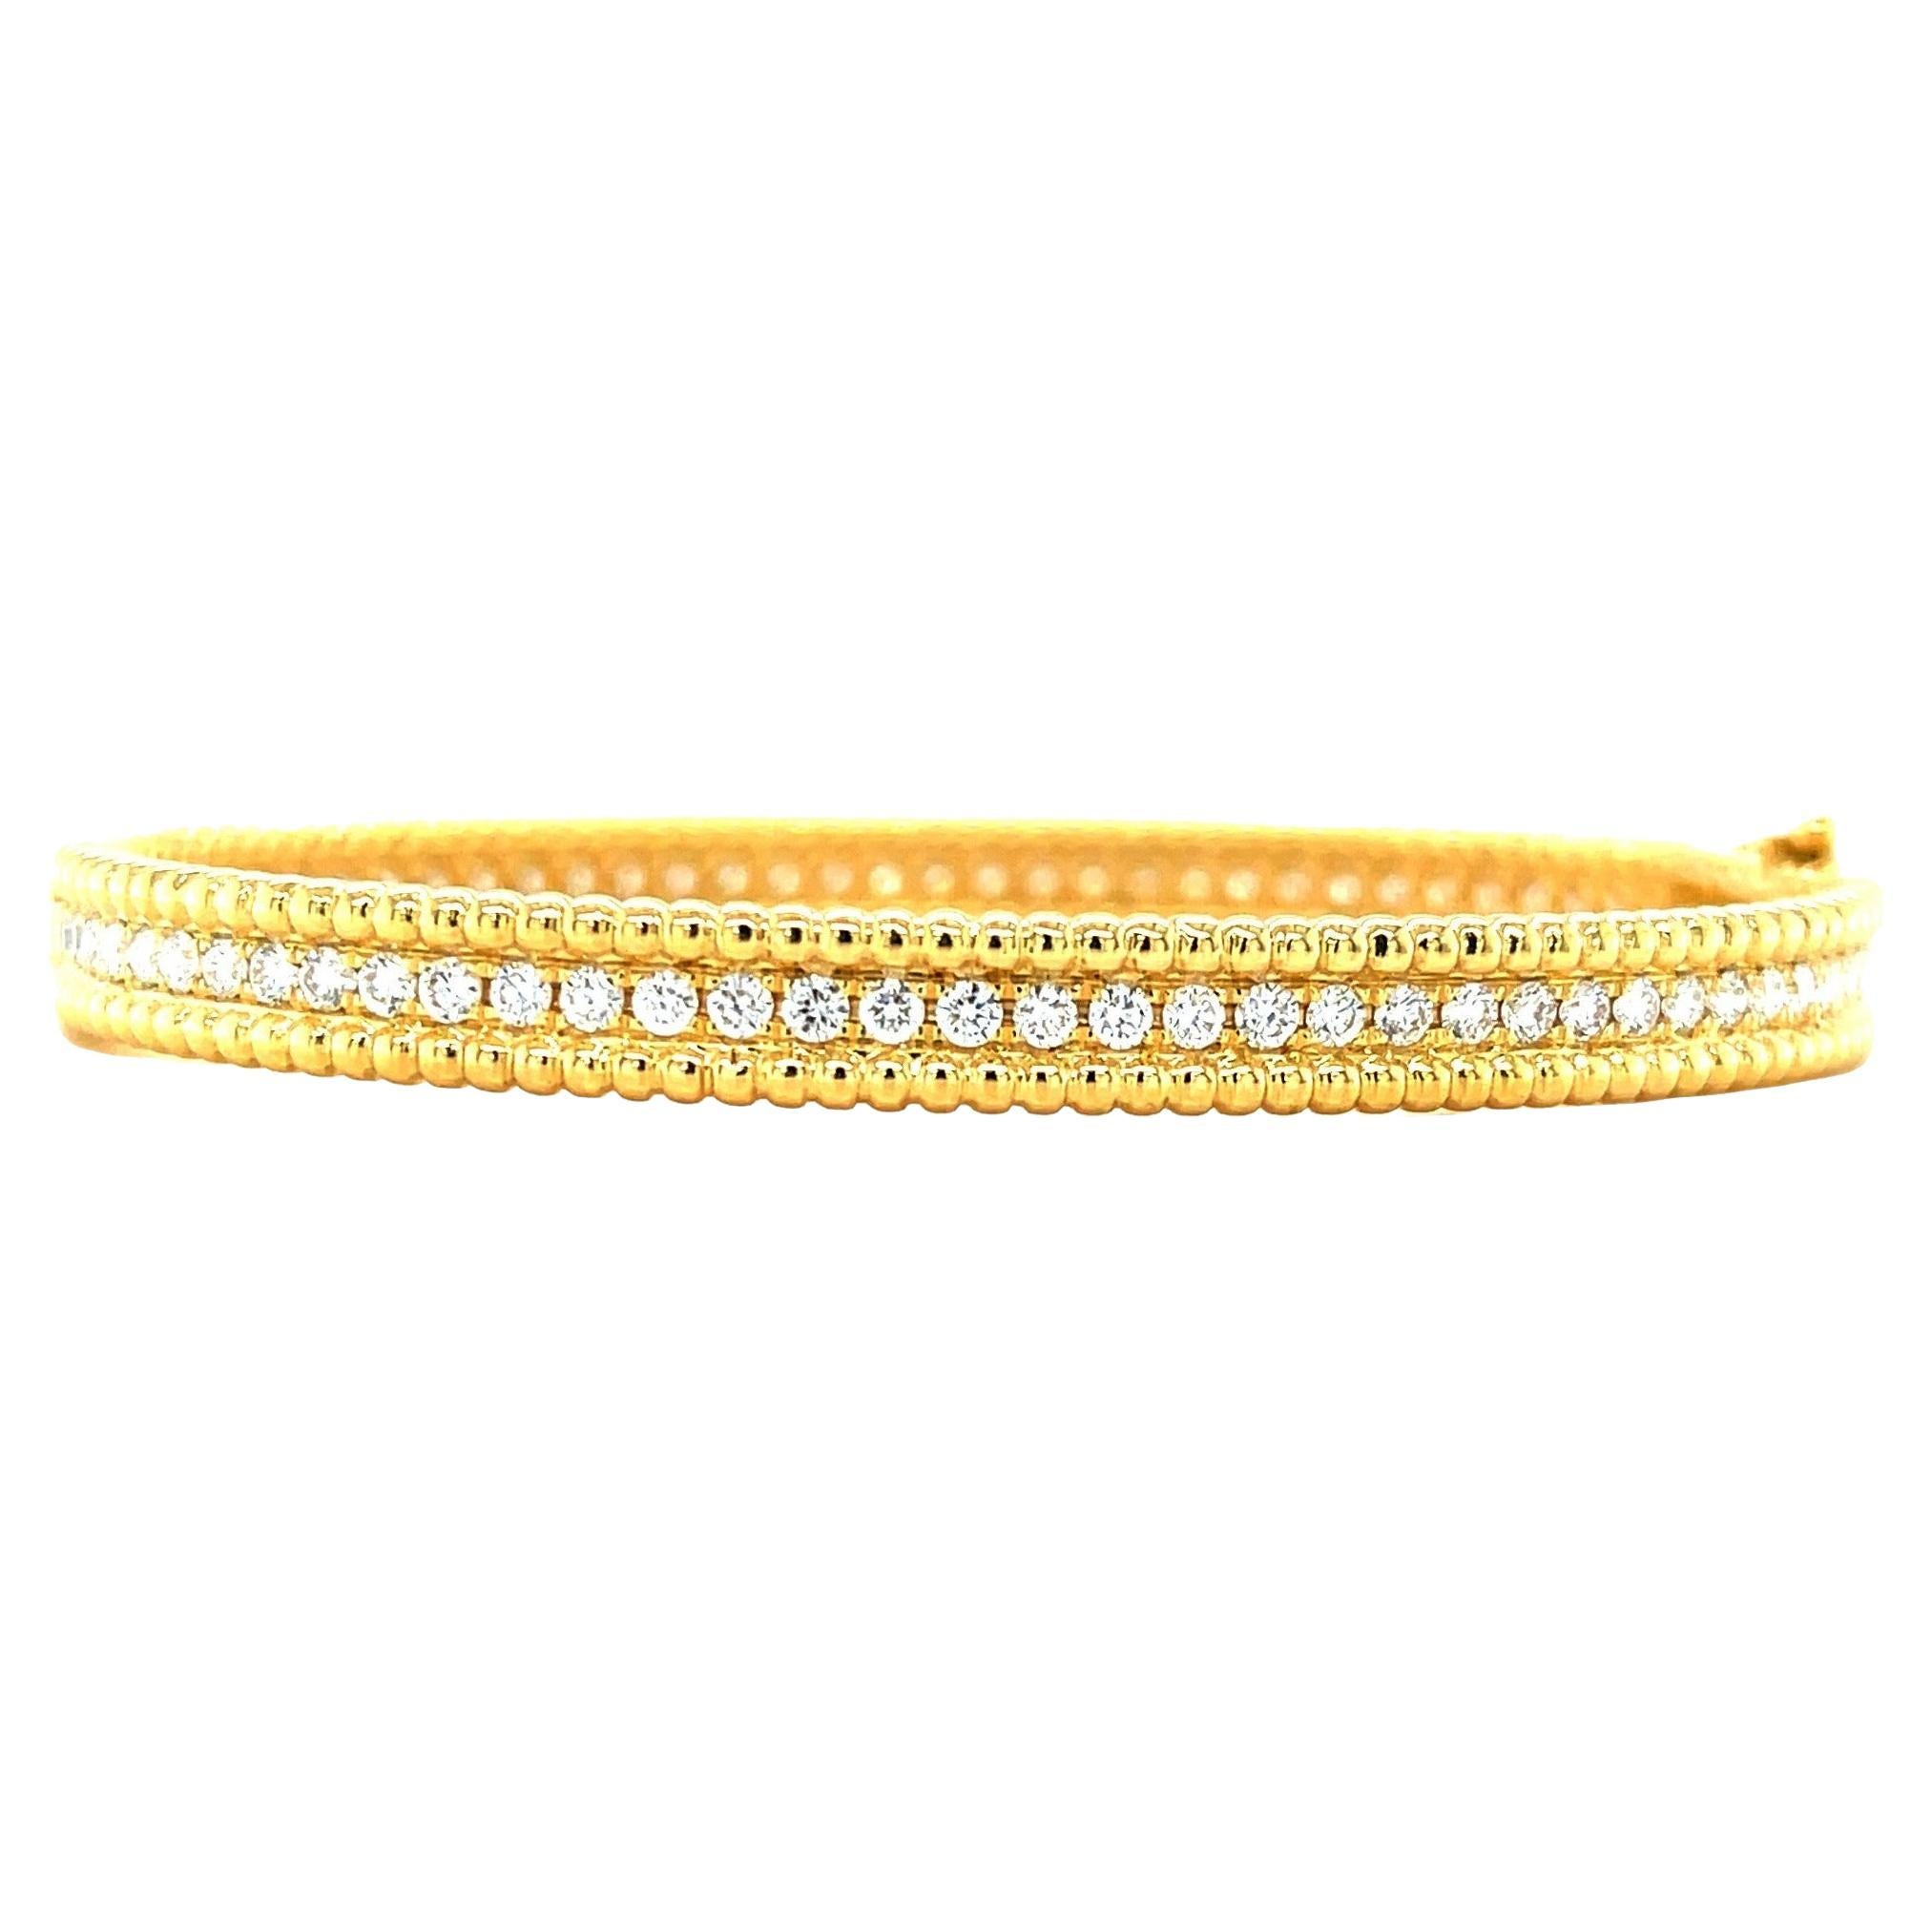 This beautiful diamond bangle will make a perfect signature bracelet whether you're 25 or 85! Nearly 2 carats of sparkling, round brilliant diamonds are individually hand-set down the center of this exquisite 18k yellow gold bracelet. The intricate,